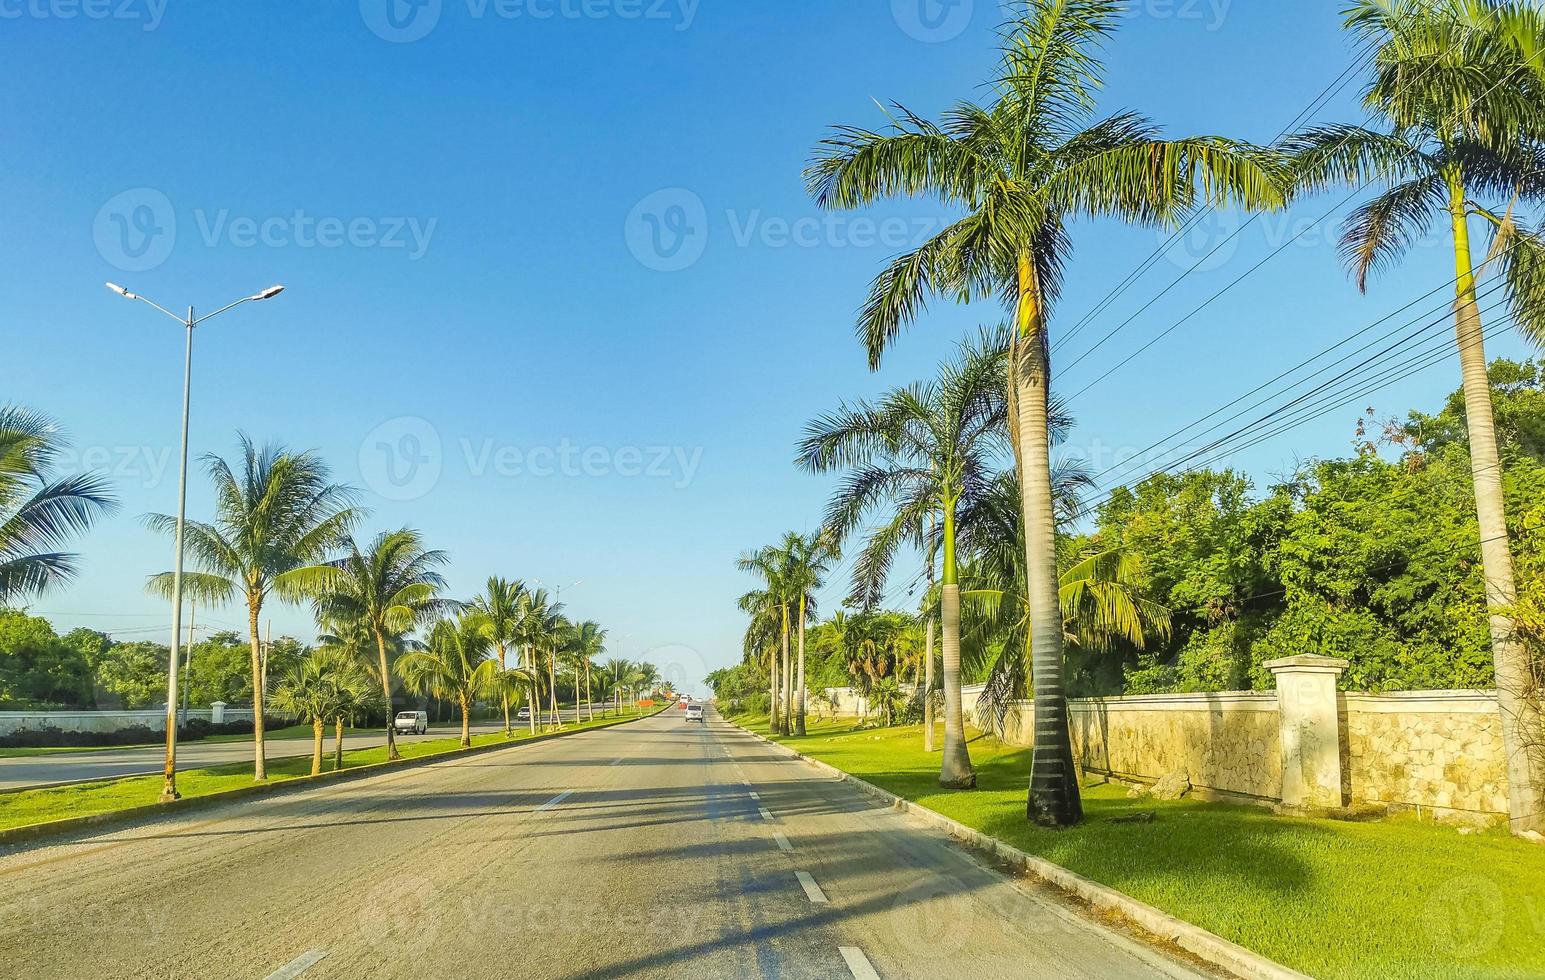 Typical street road and cityscape of Playa del Carmen Mexico. photo